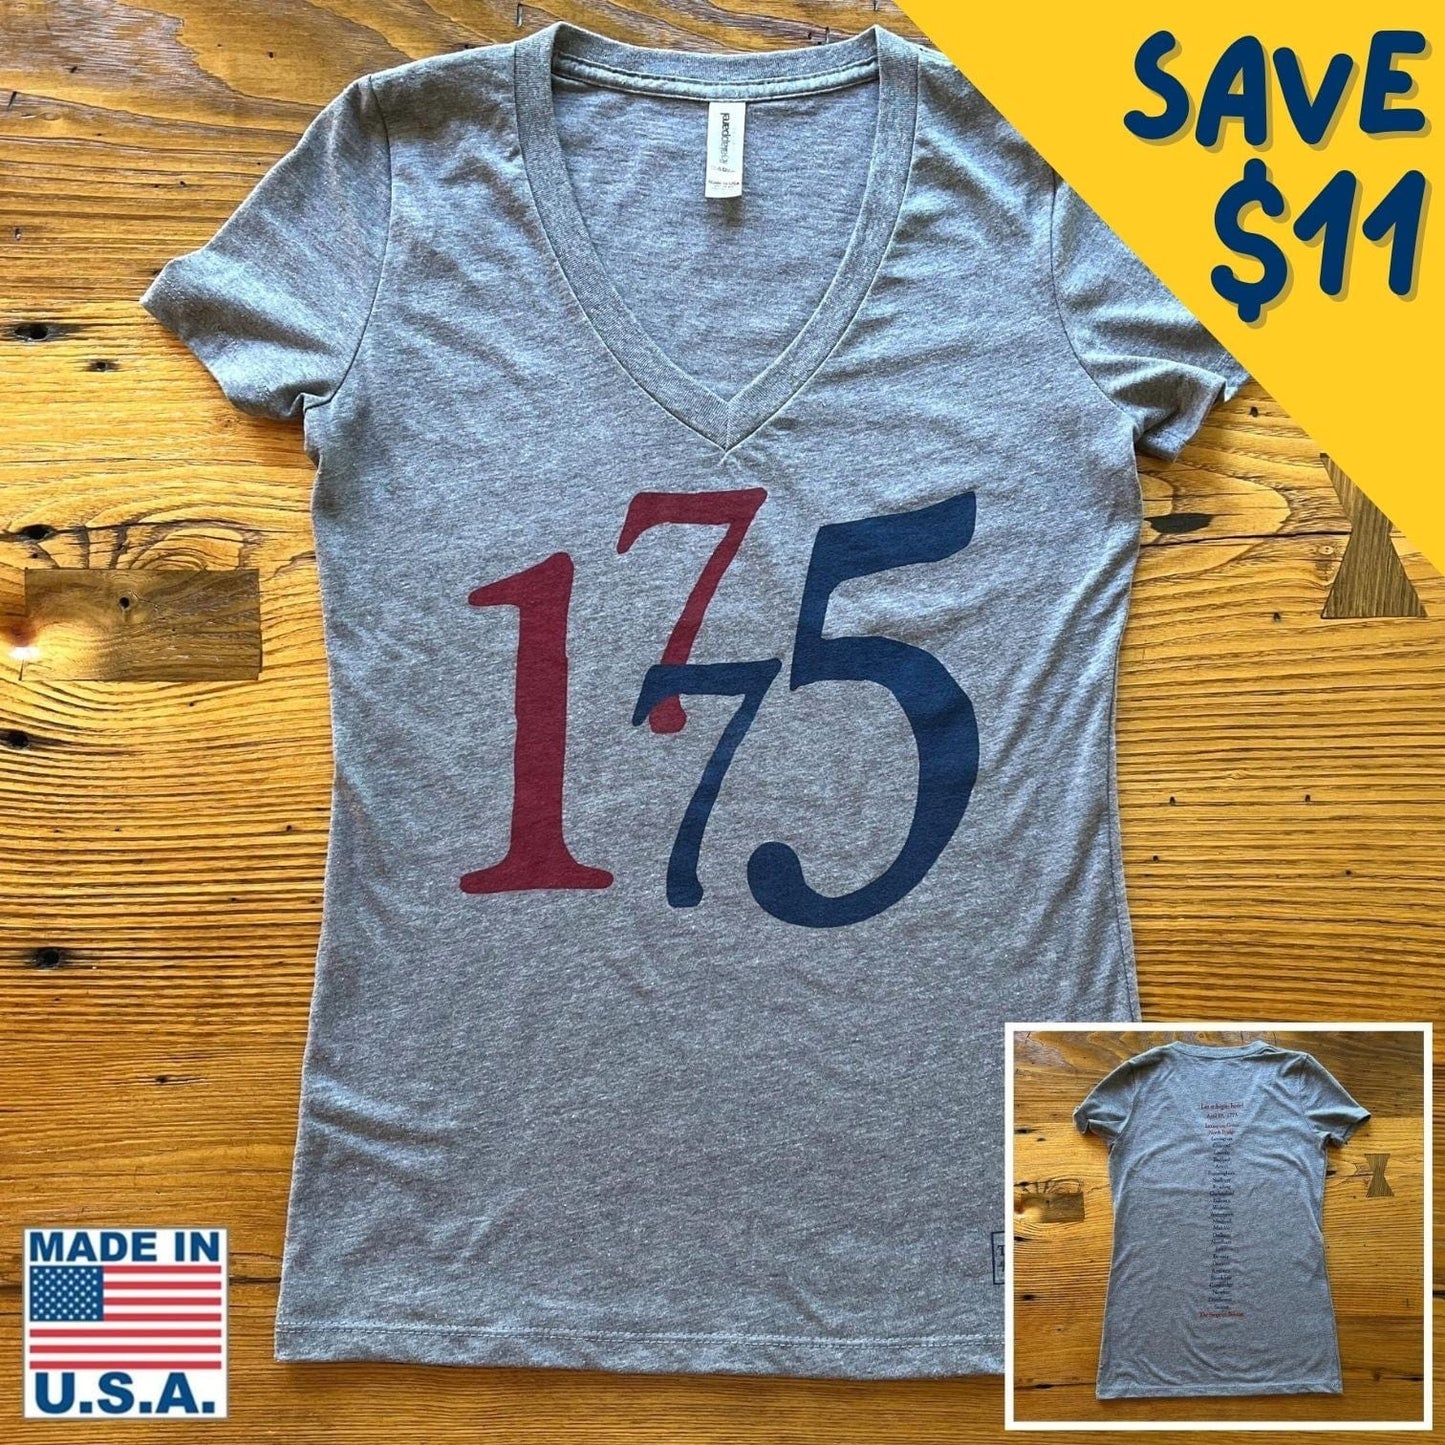 Lexington and Concord "1775" Women's v-neck shirt — Made in the USA